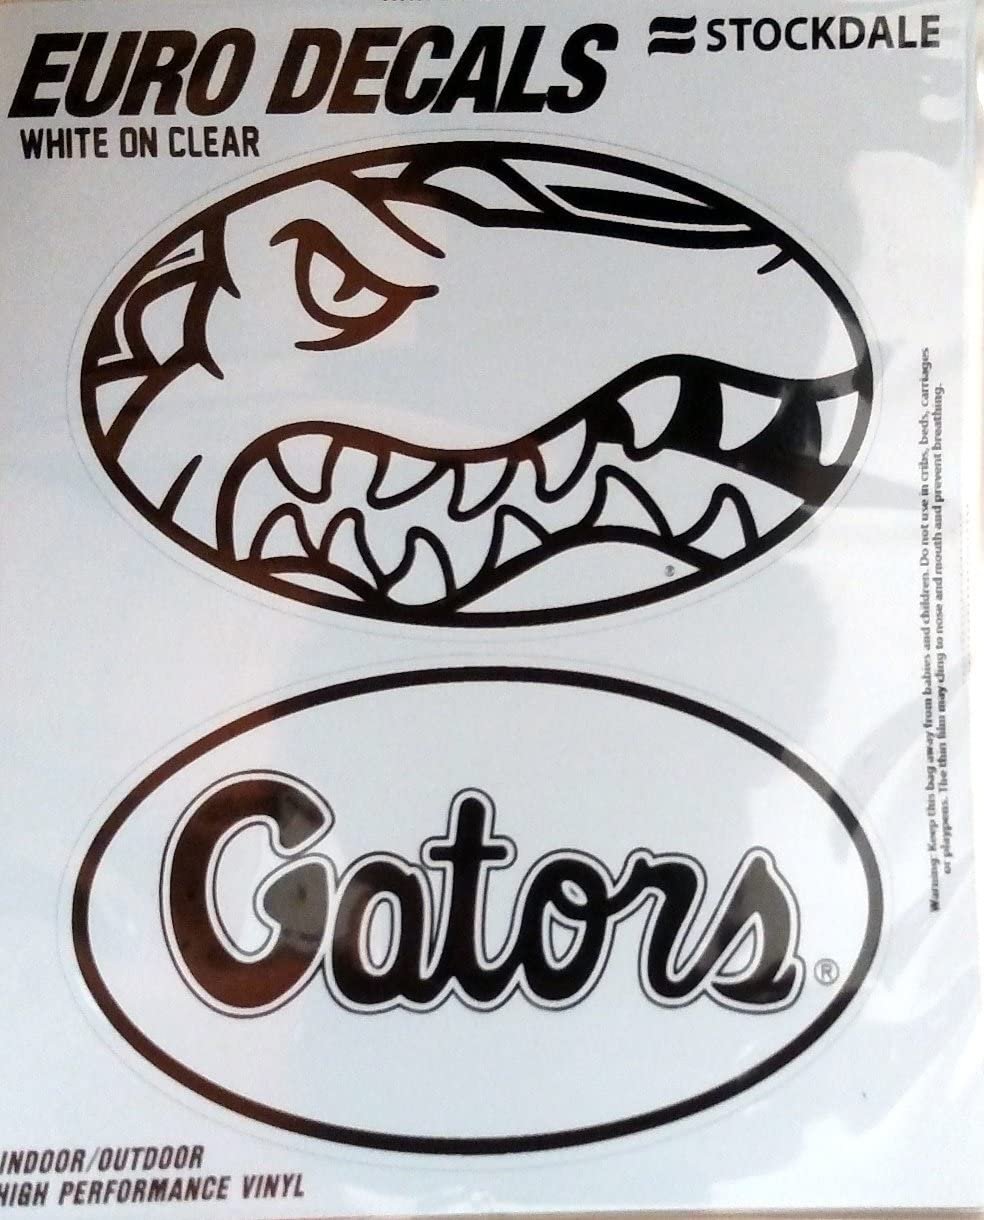 University of Florida Gators 2-Piece White and Clear Euro Decal Sticker Set, 4x2.5 Inch Each